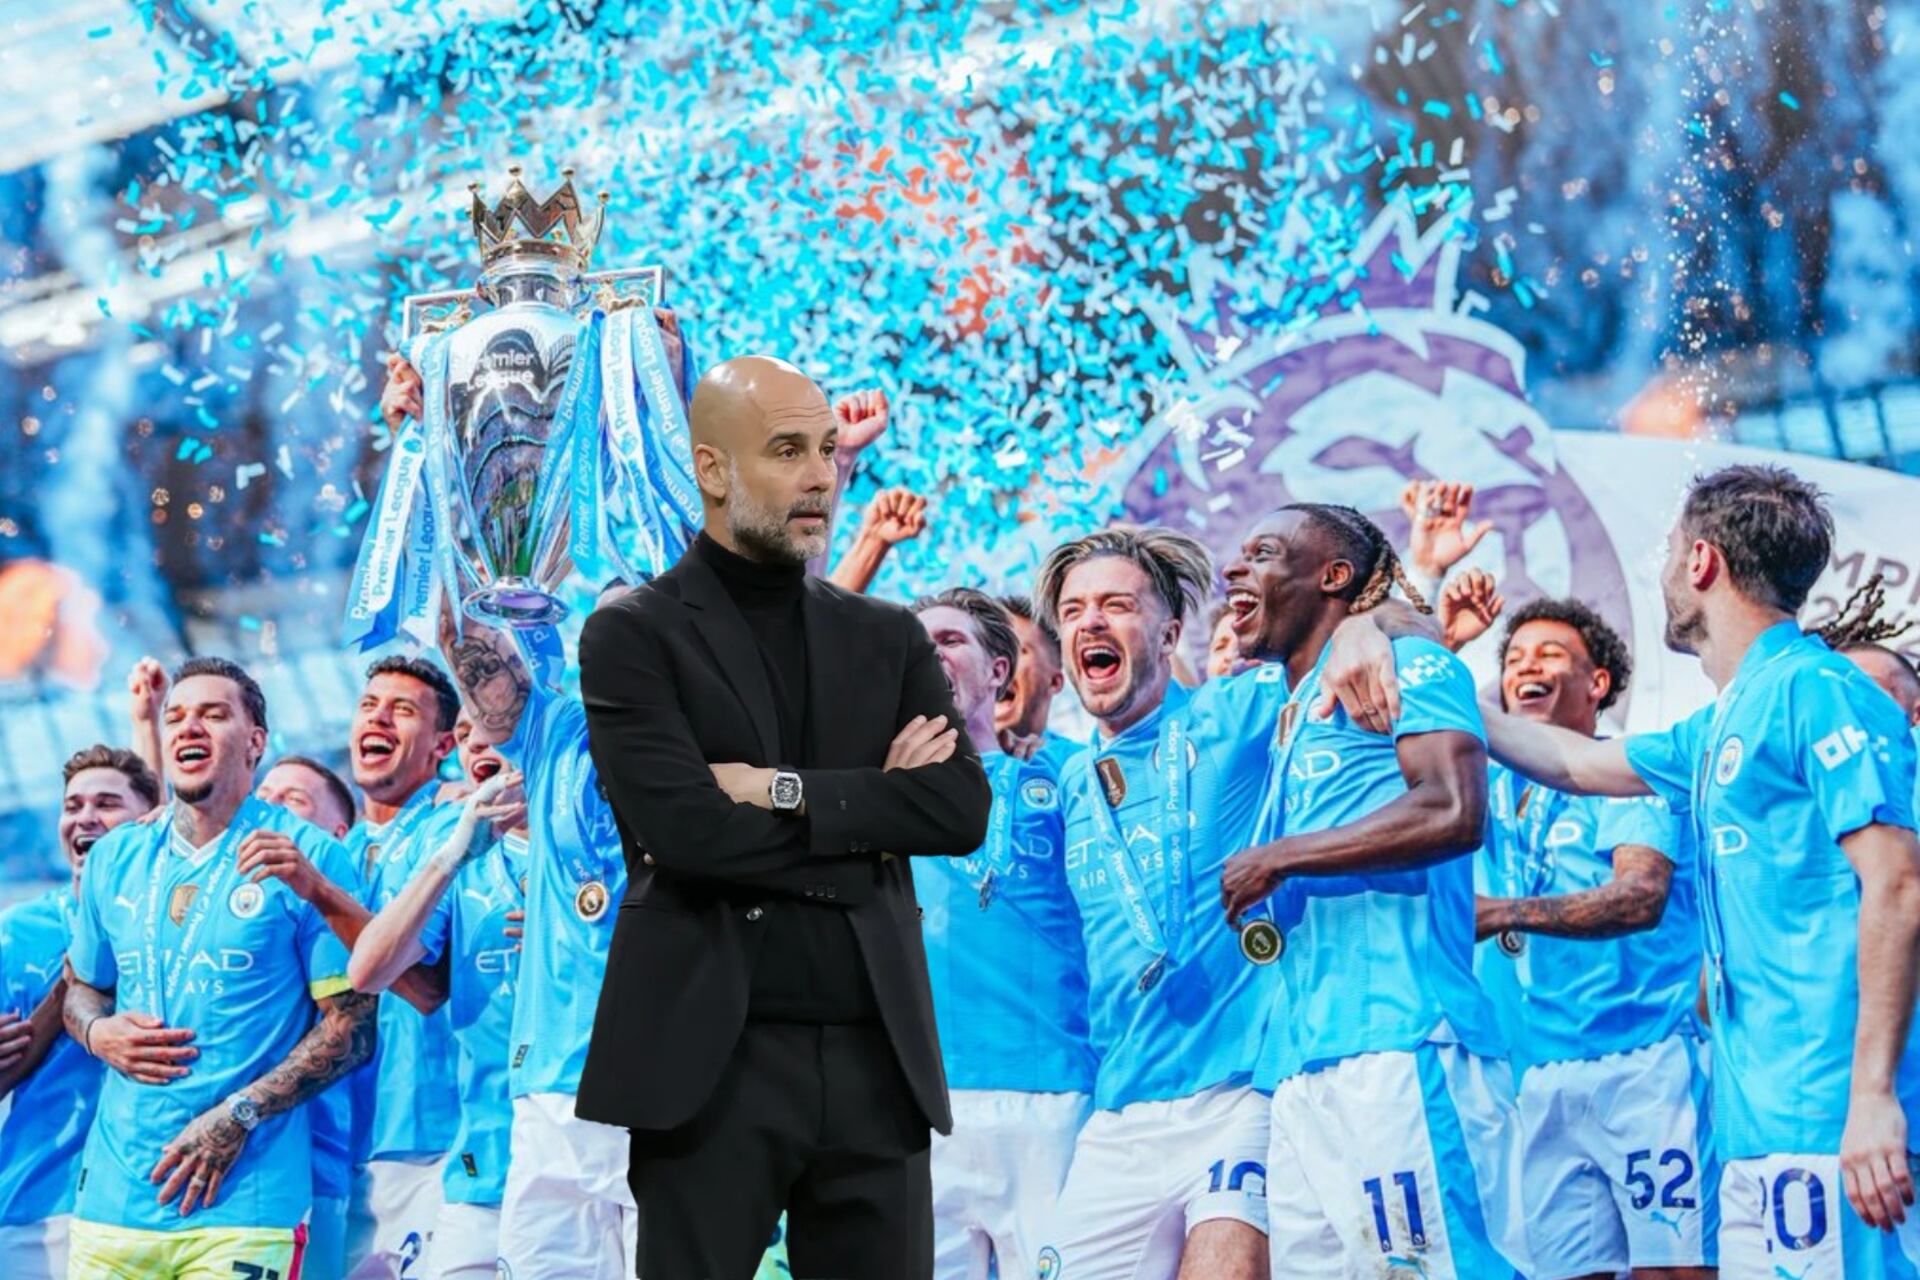 (PHOTO) Guardiola won’t like it, Man City players went out partying and this is how they ended up